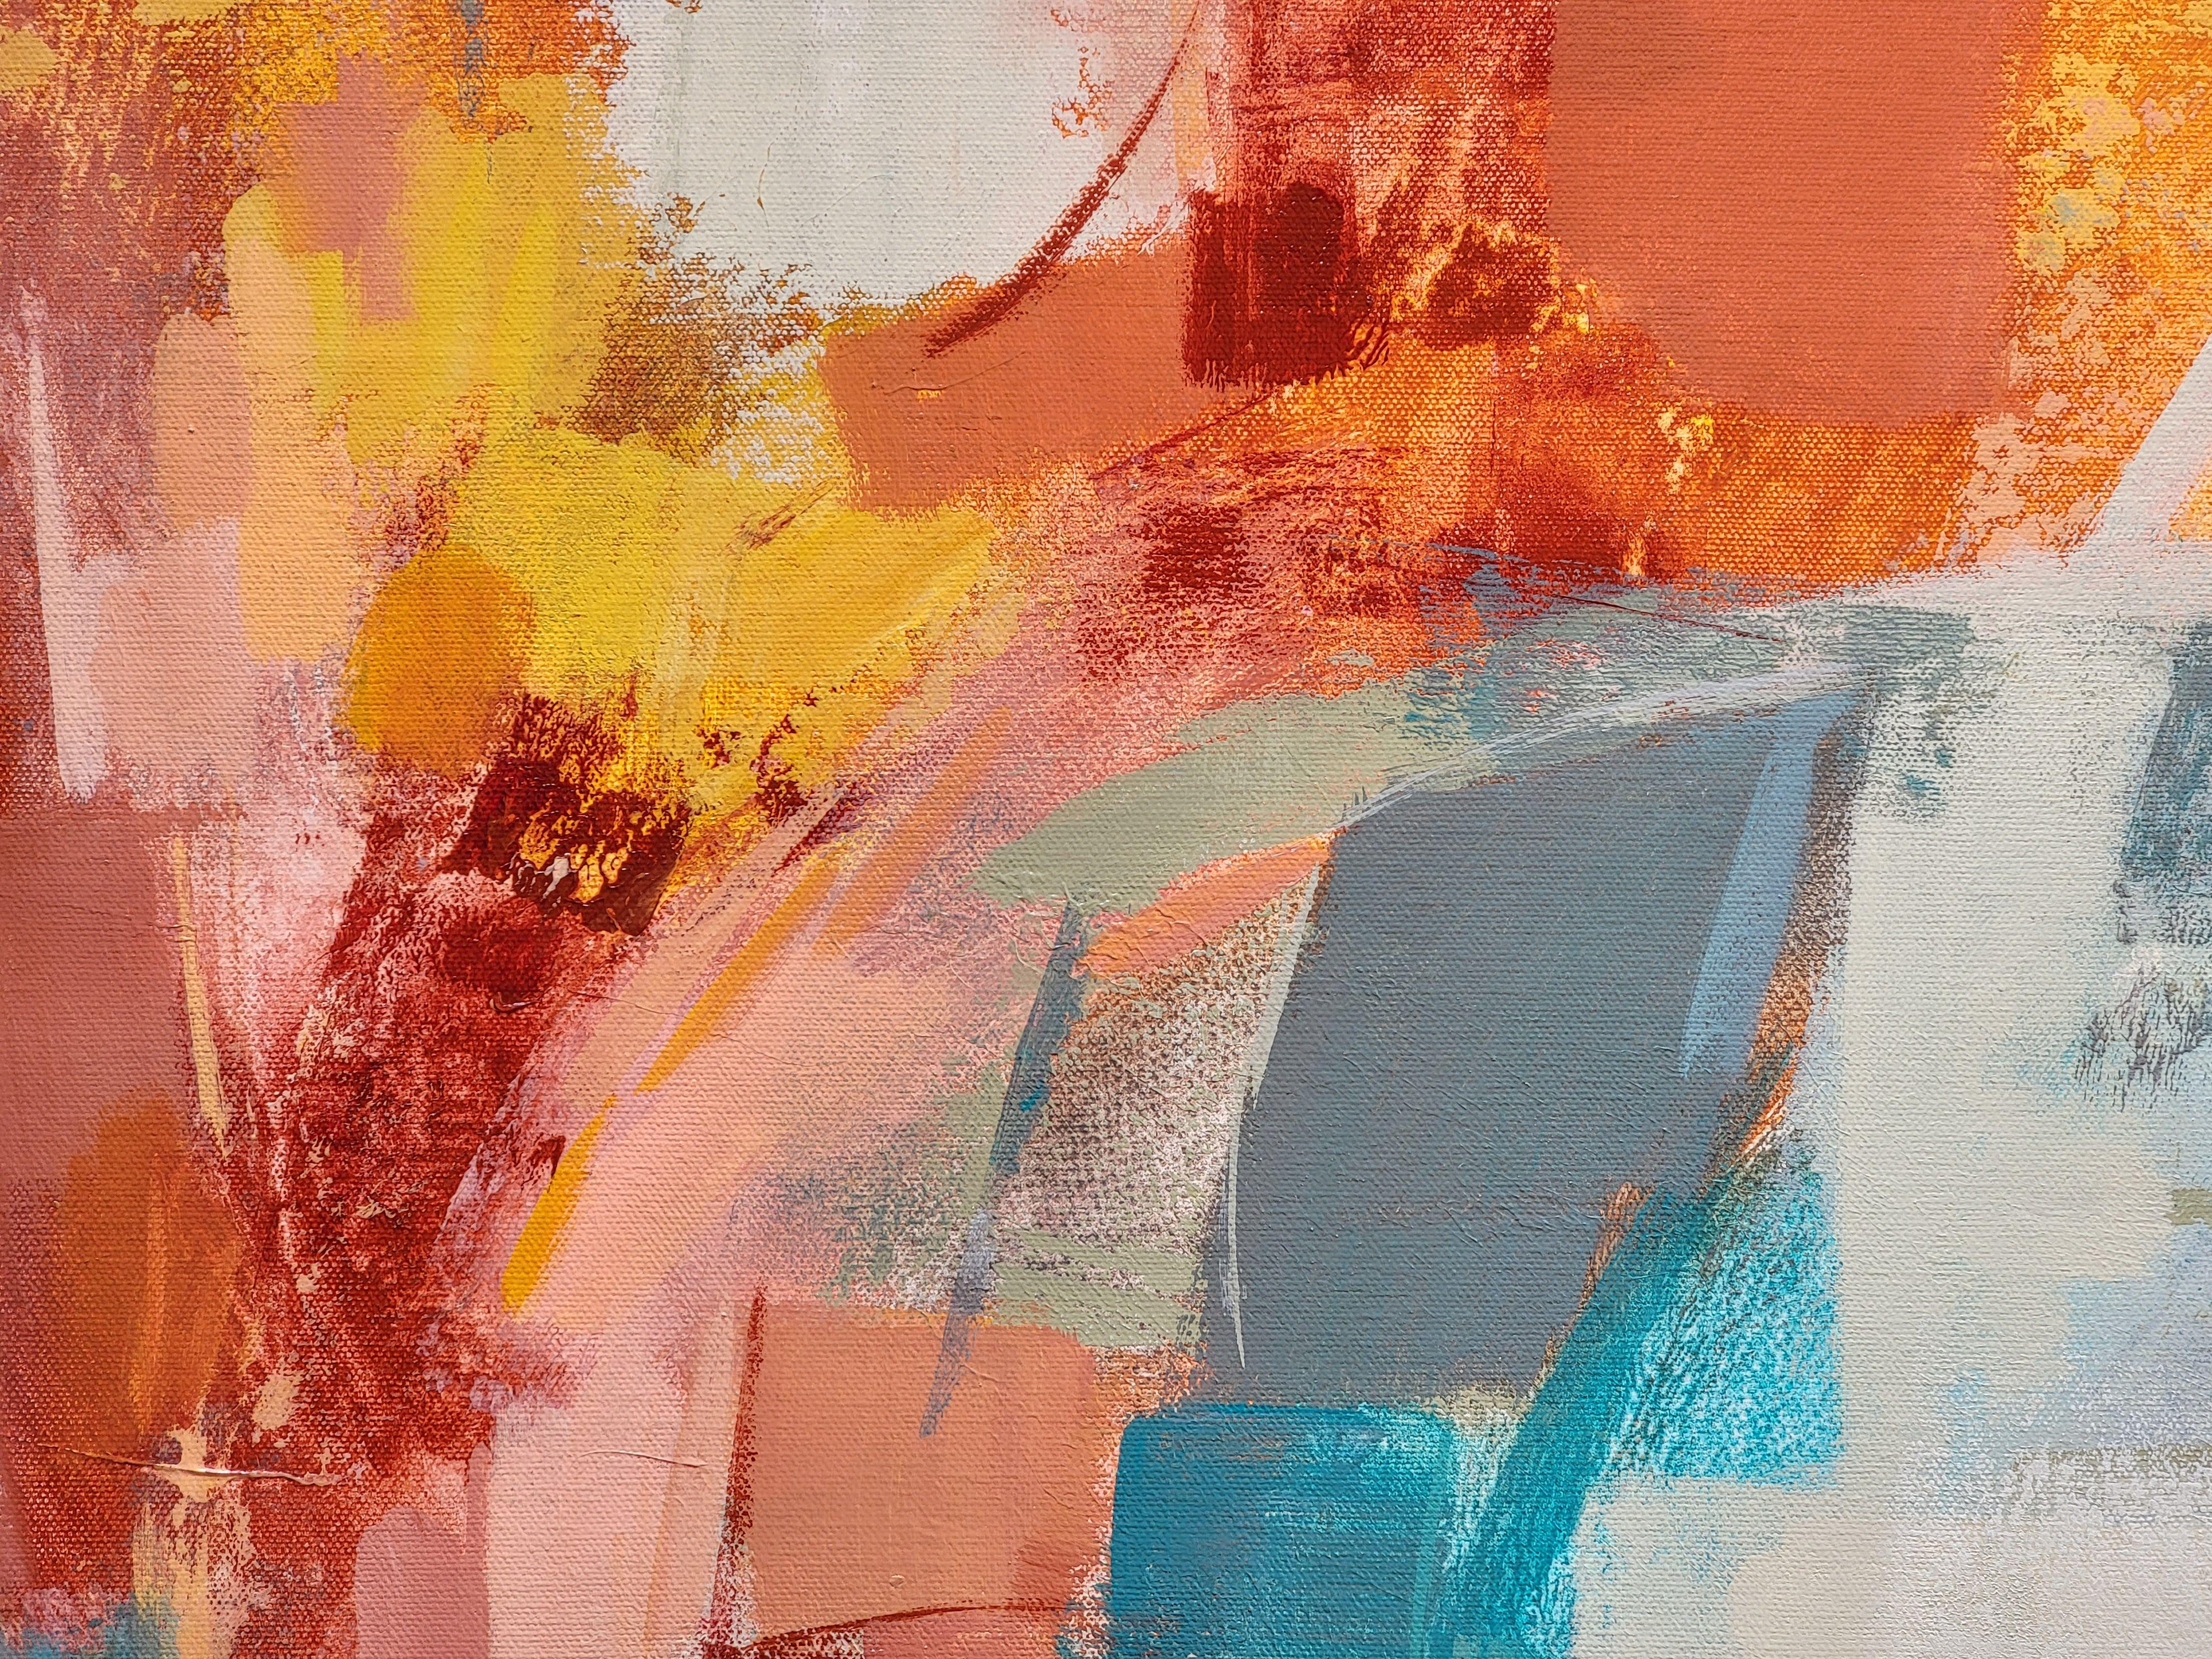 This large abstract was inspired by the vivid colors of the Caribbean islands. It conveys joy and happiness and it is an expression of summer. Warm coral, pink and yellow interact with cool teal on a neutral background. Drips, smudges, color